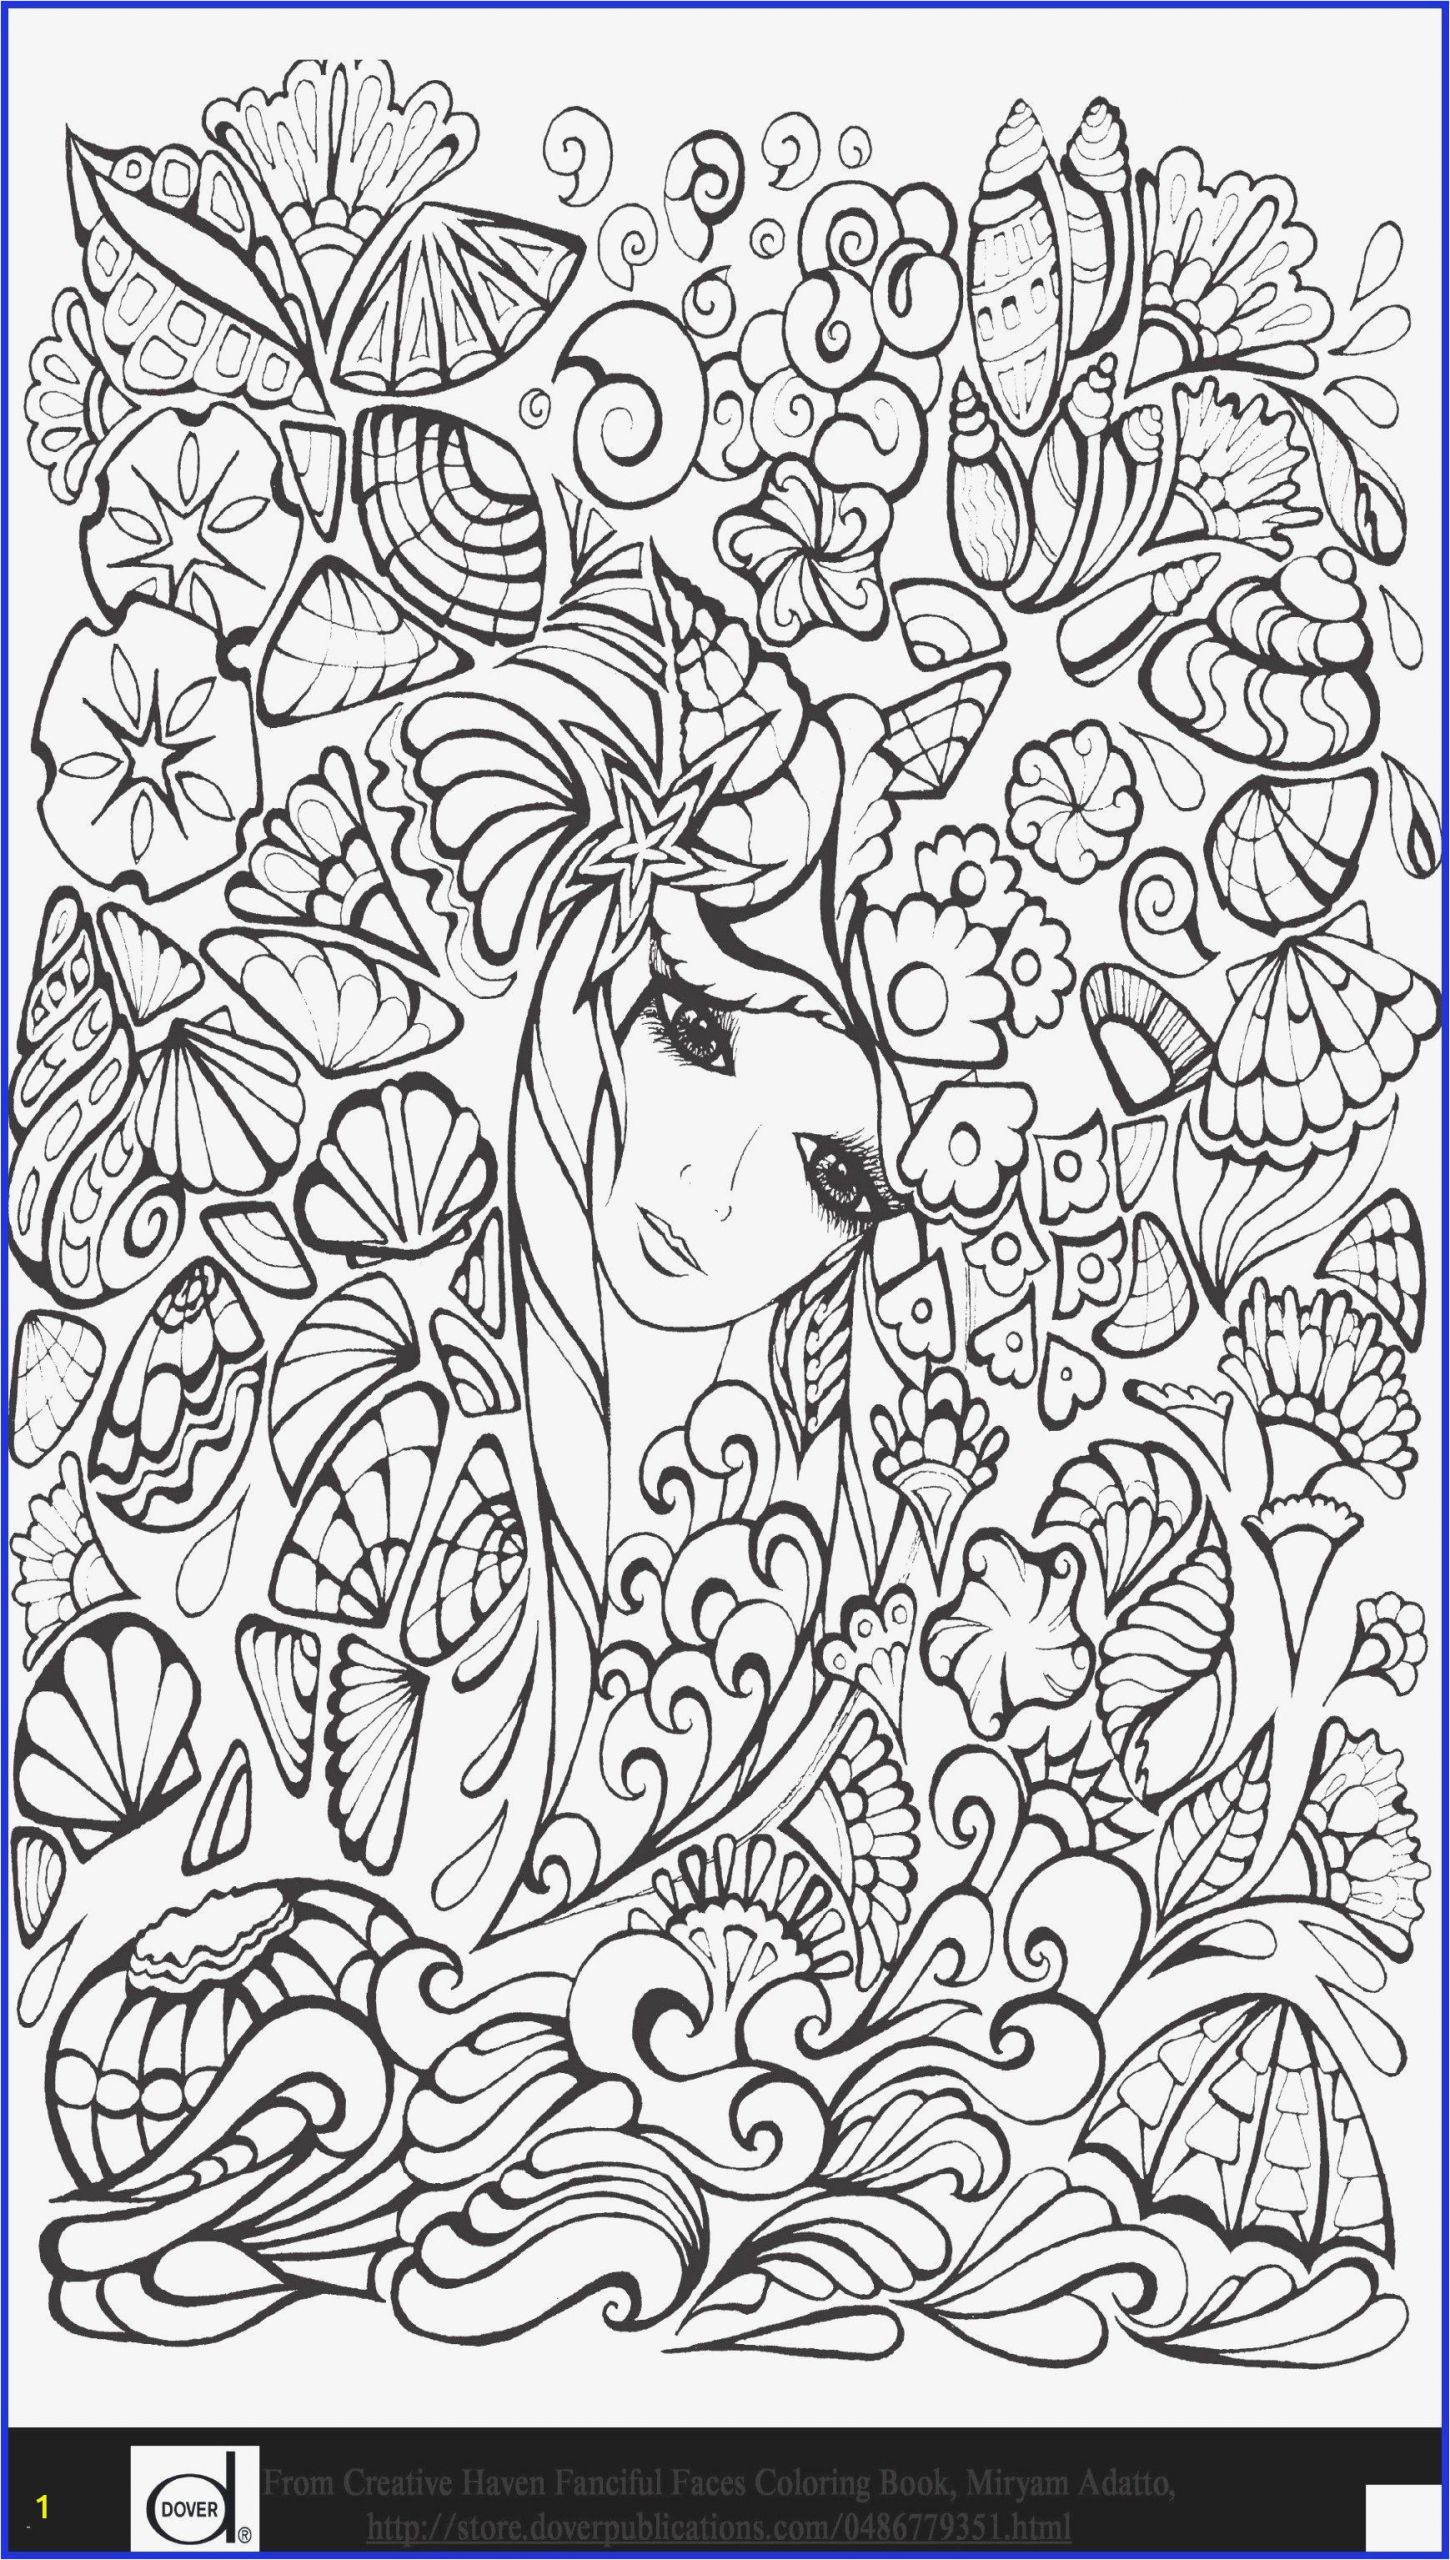 Coloring Pages for Adults Printable Free How to Design Coloring Books In 2020